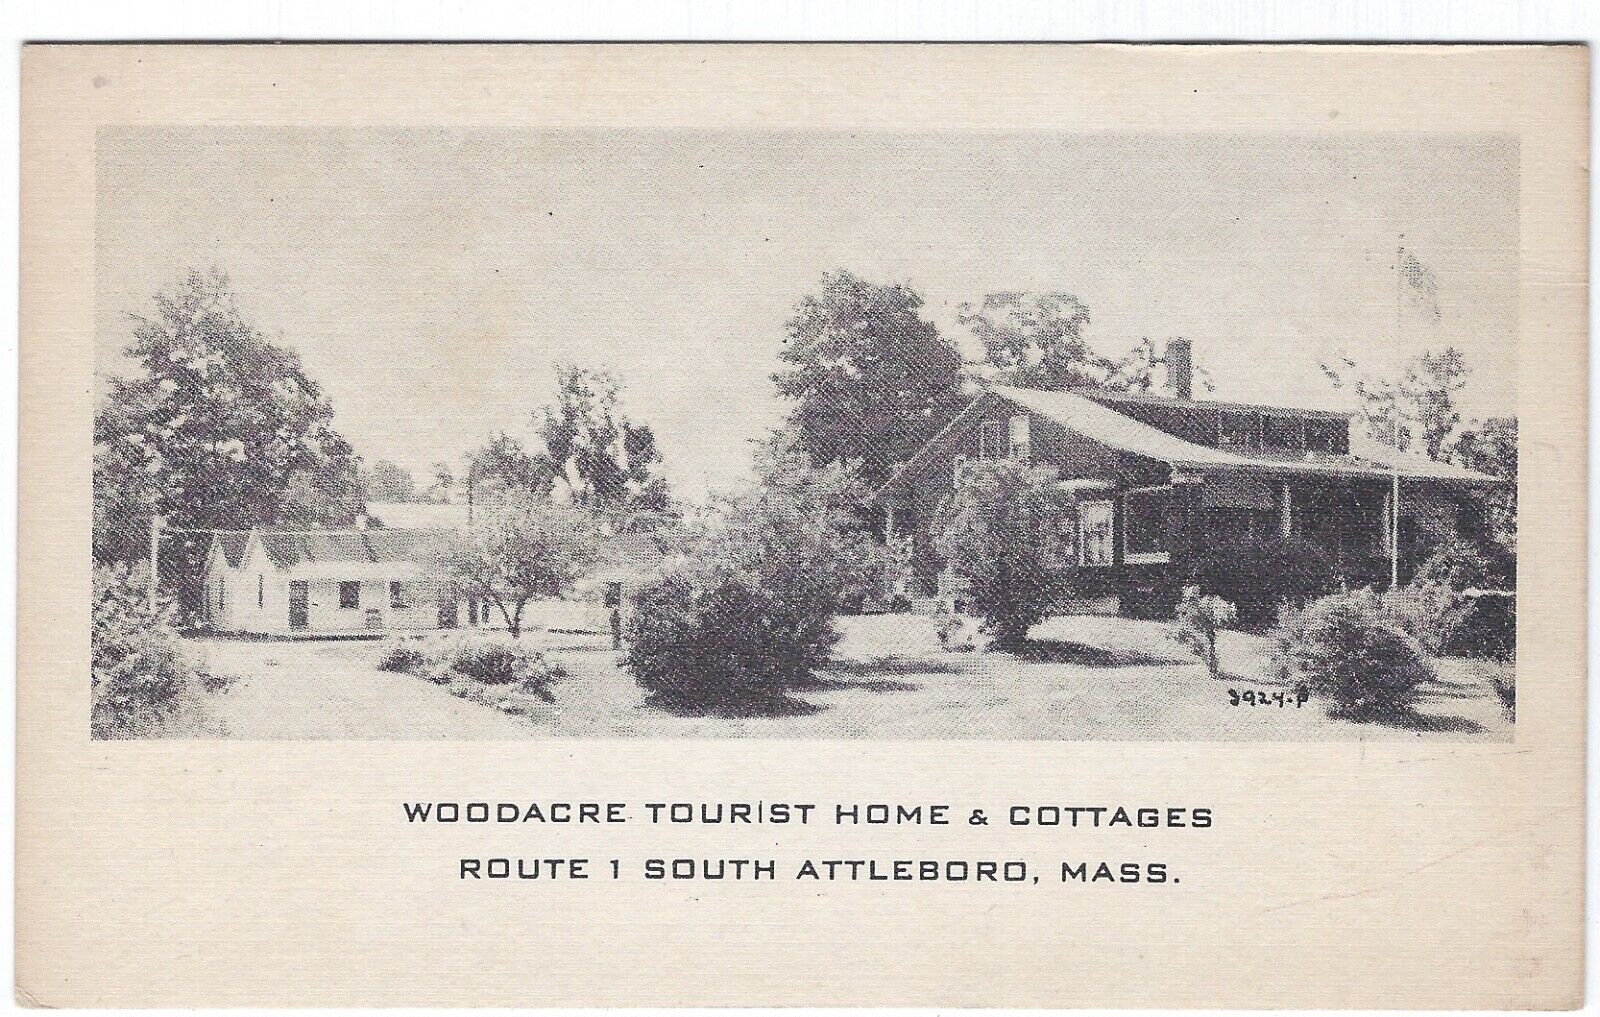 Woodacre Tourist Home & Cottages, South Attleboro, Massachusetts Old Postcard